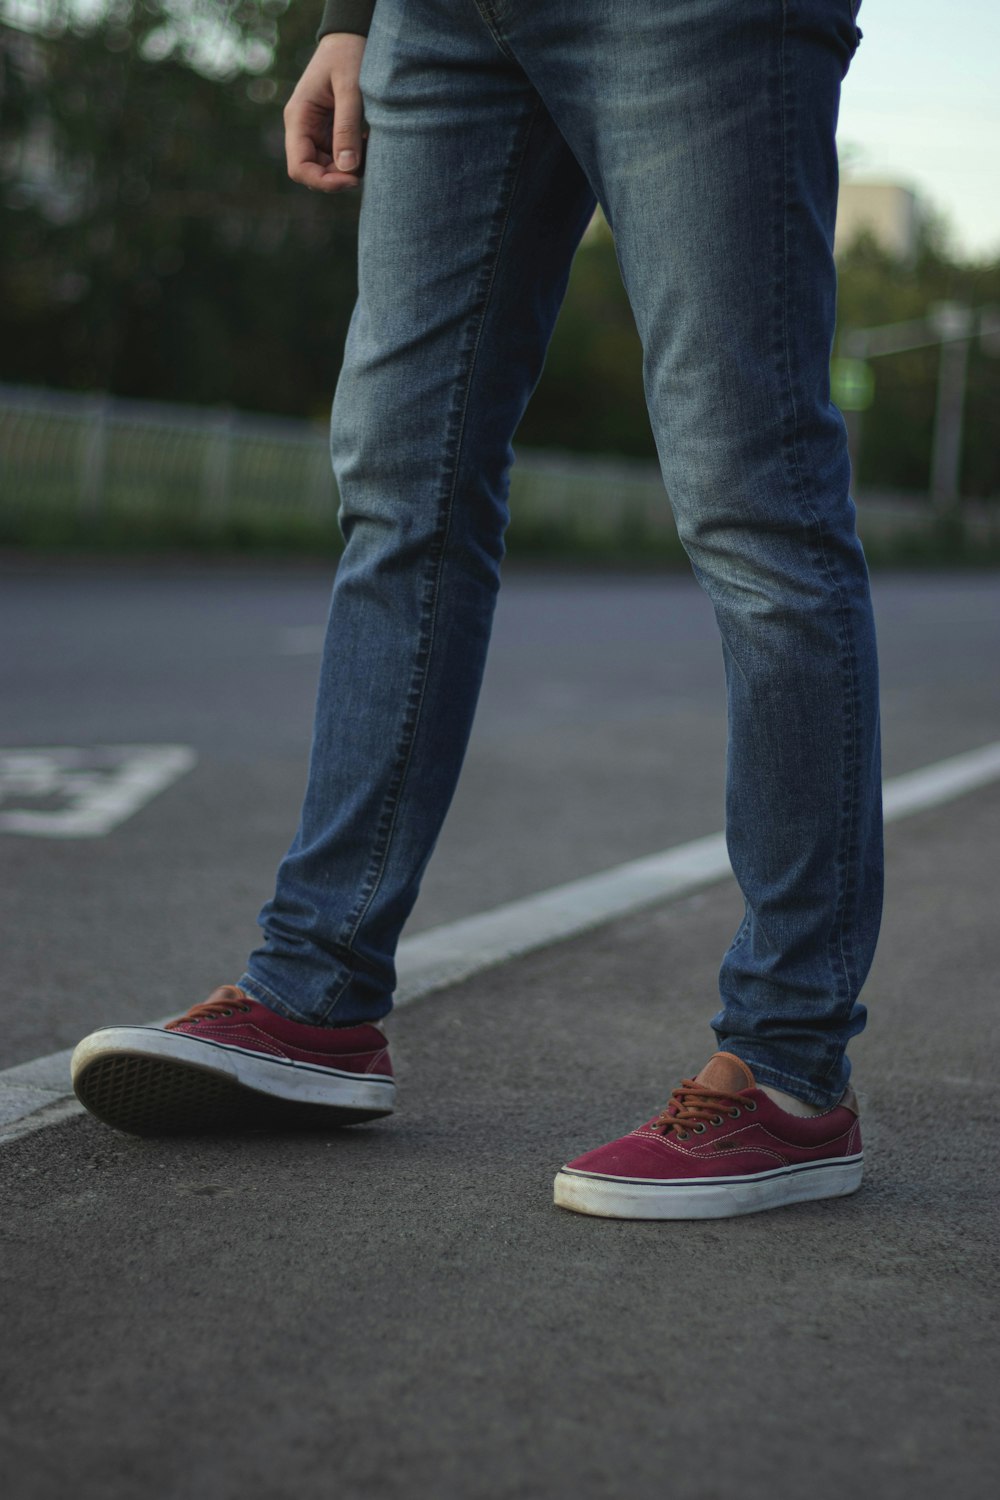 person in blue denim jeans and red nike sneakers